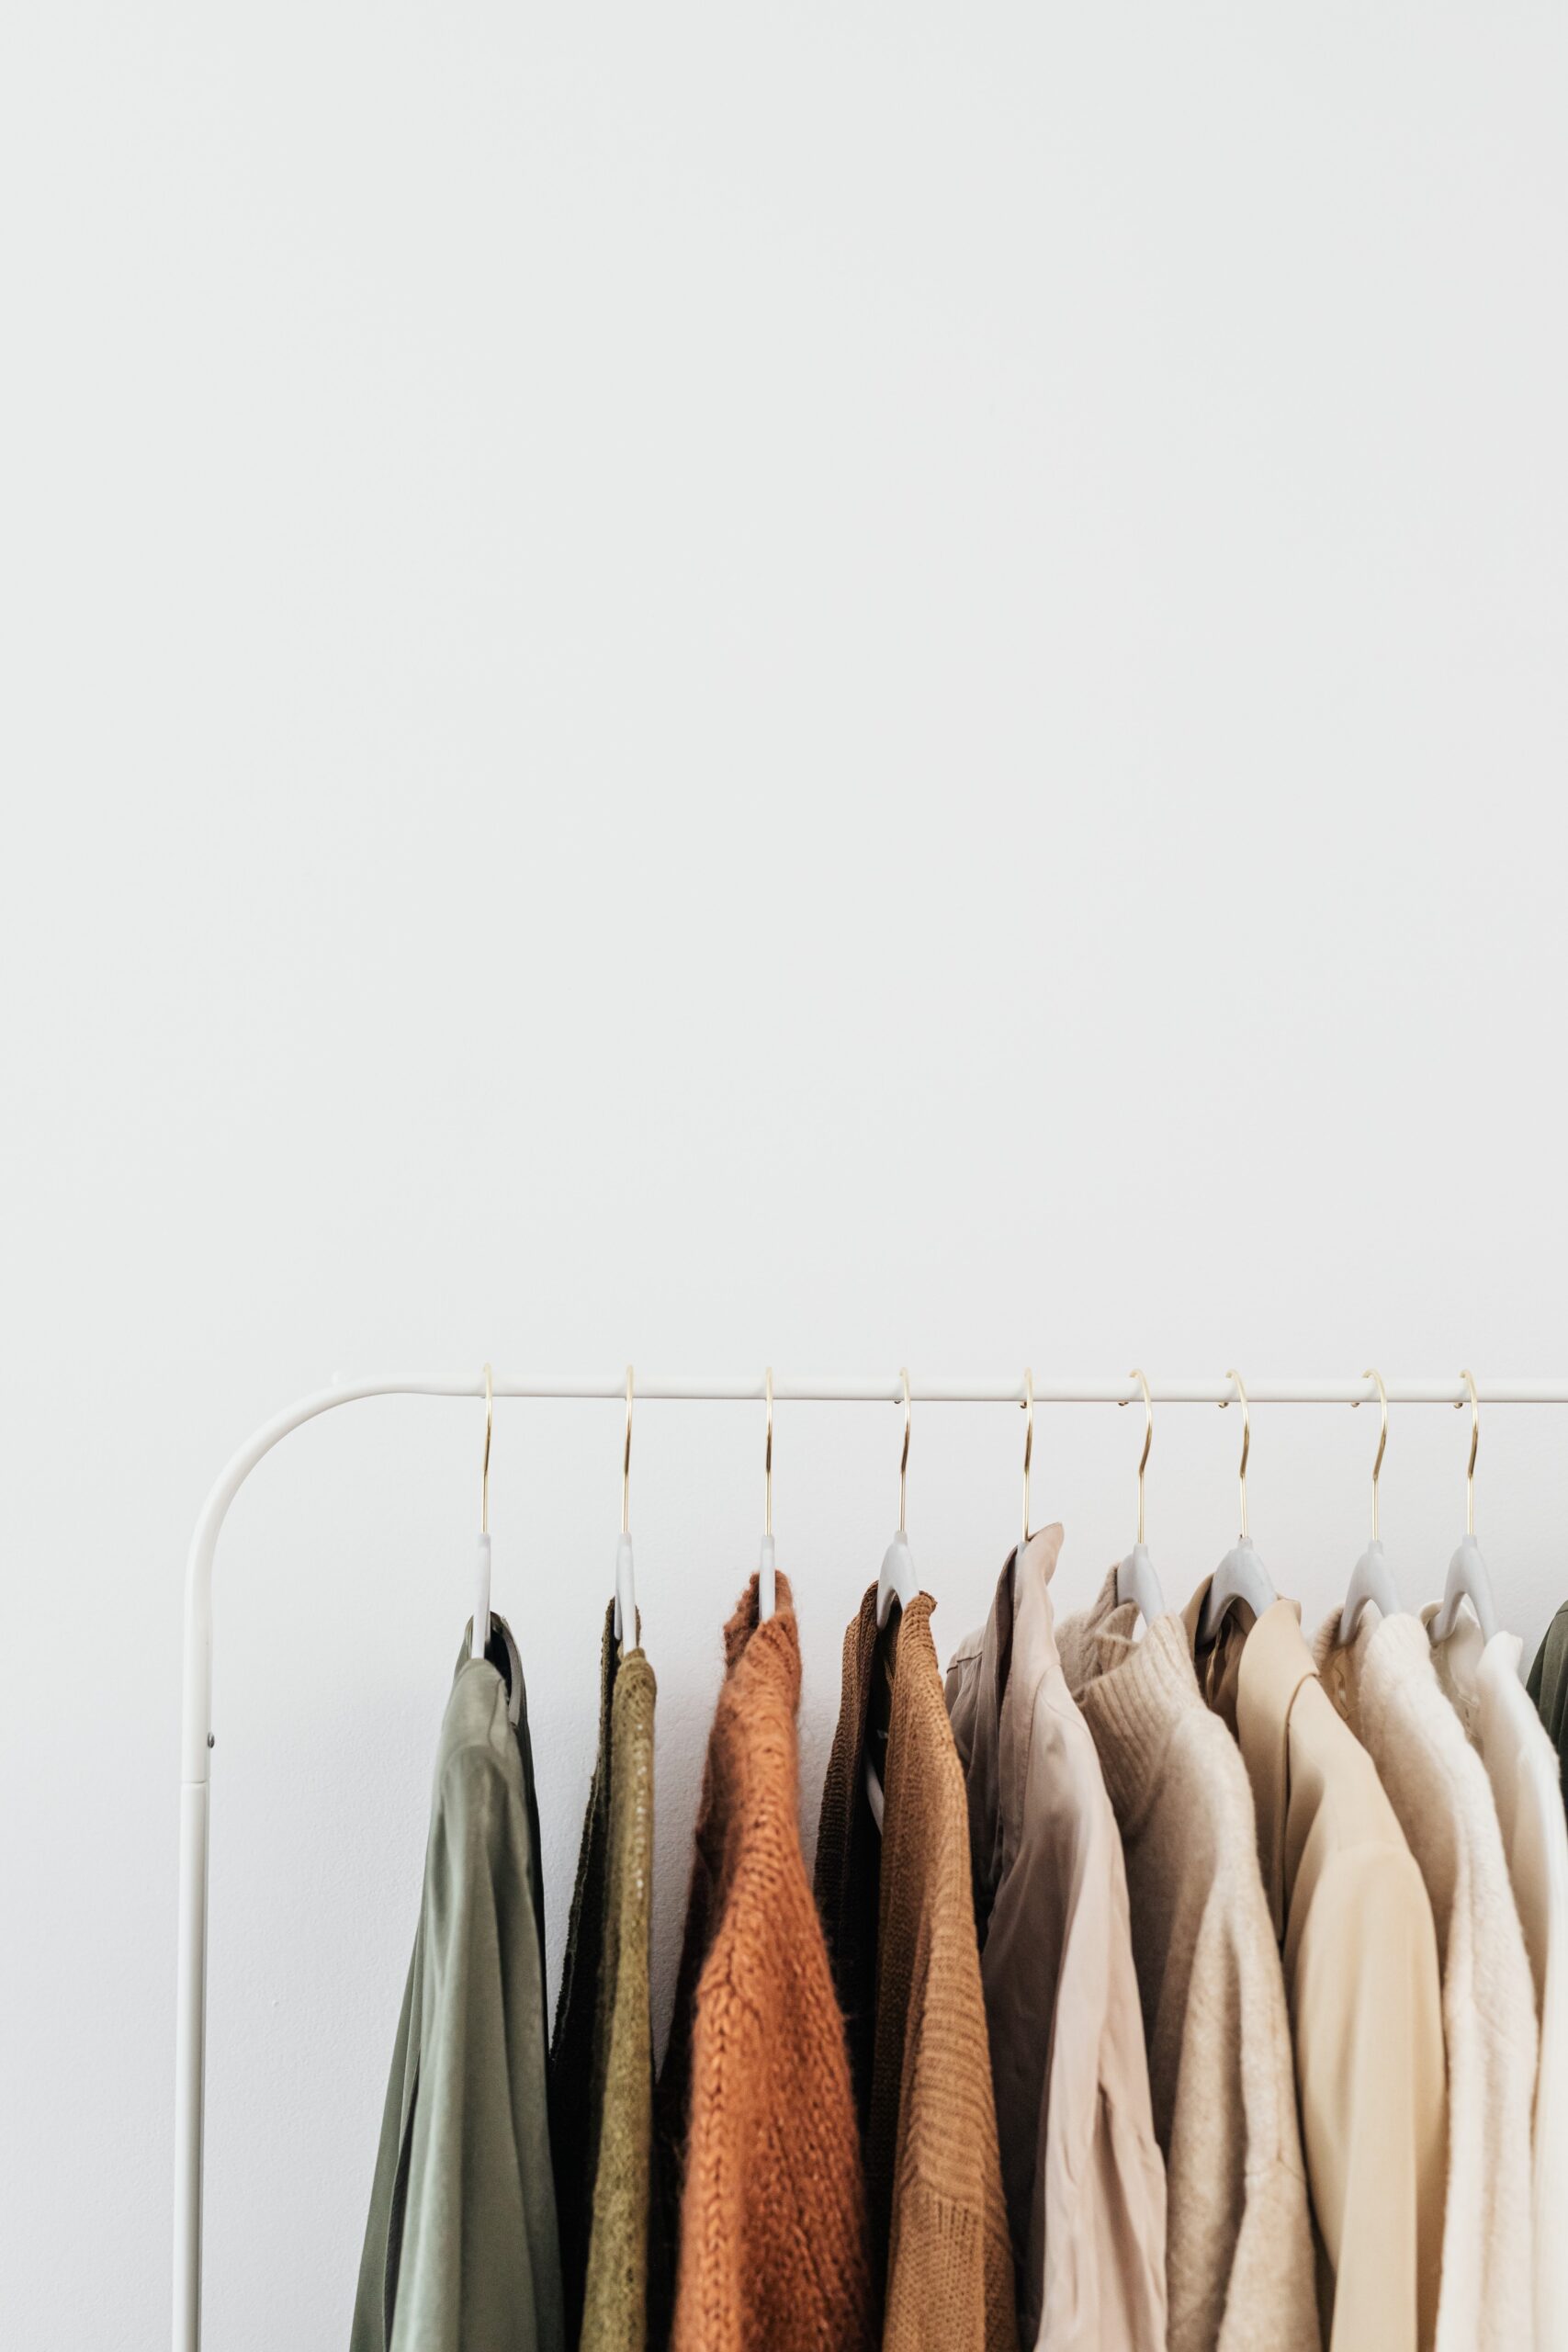 This post is about 7 sustainable brands to keep on your radar.